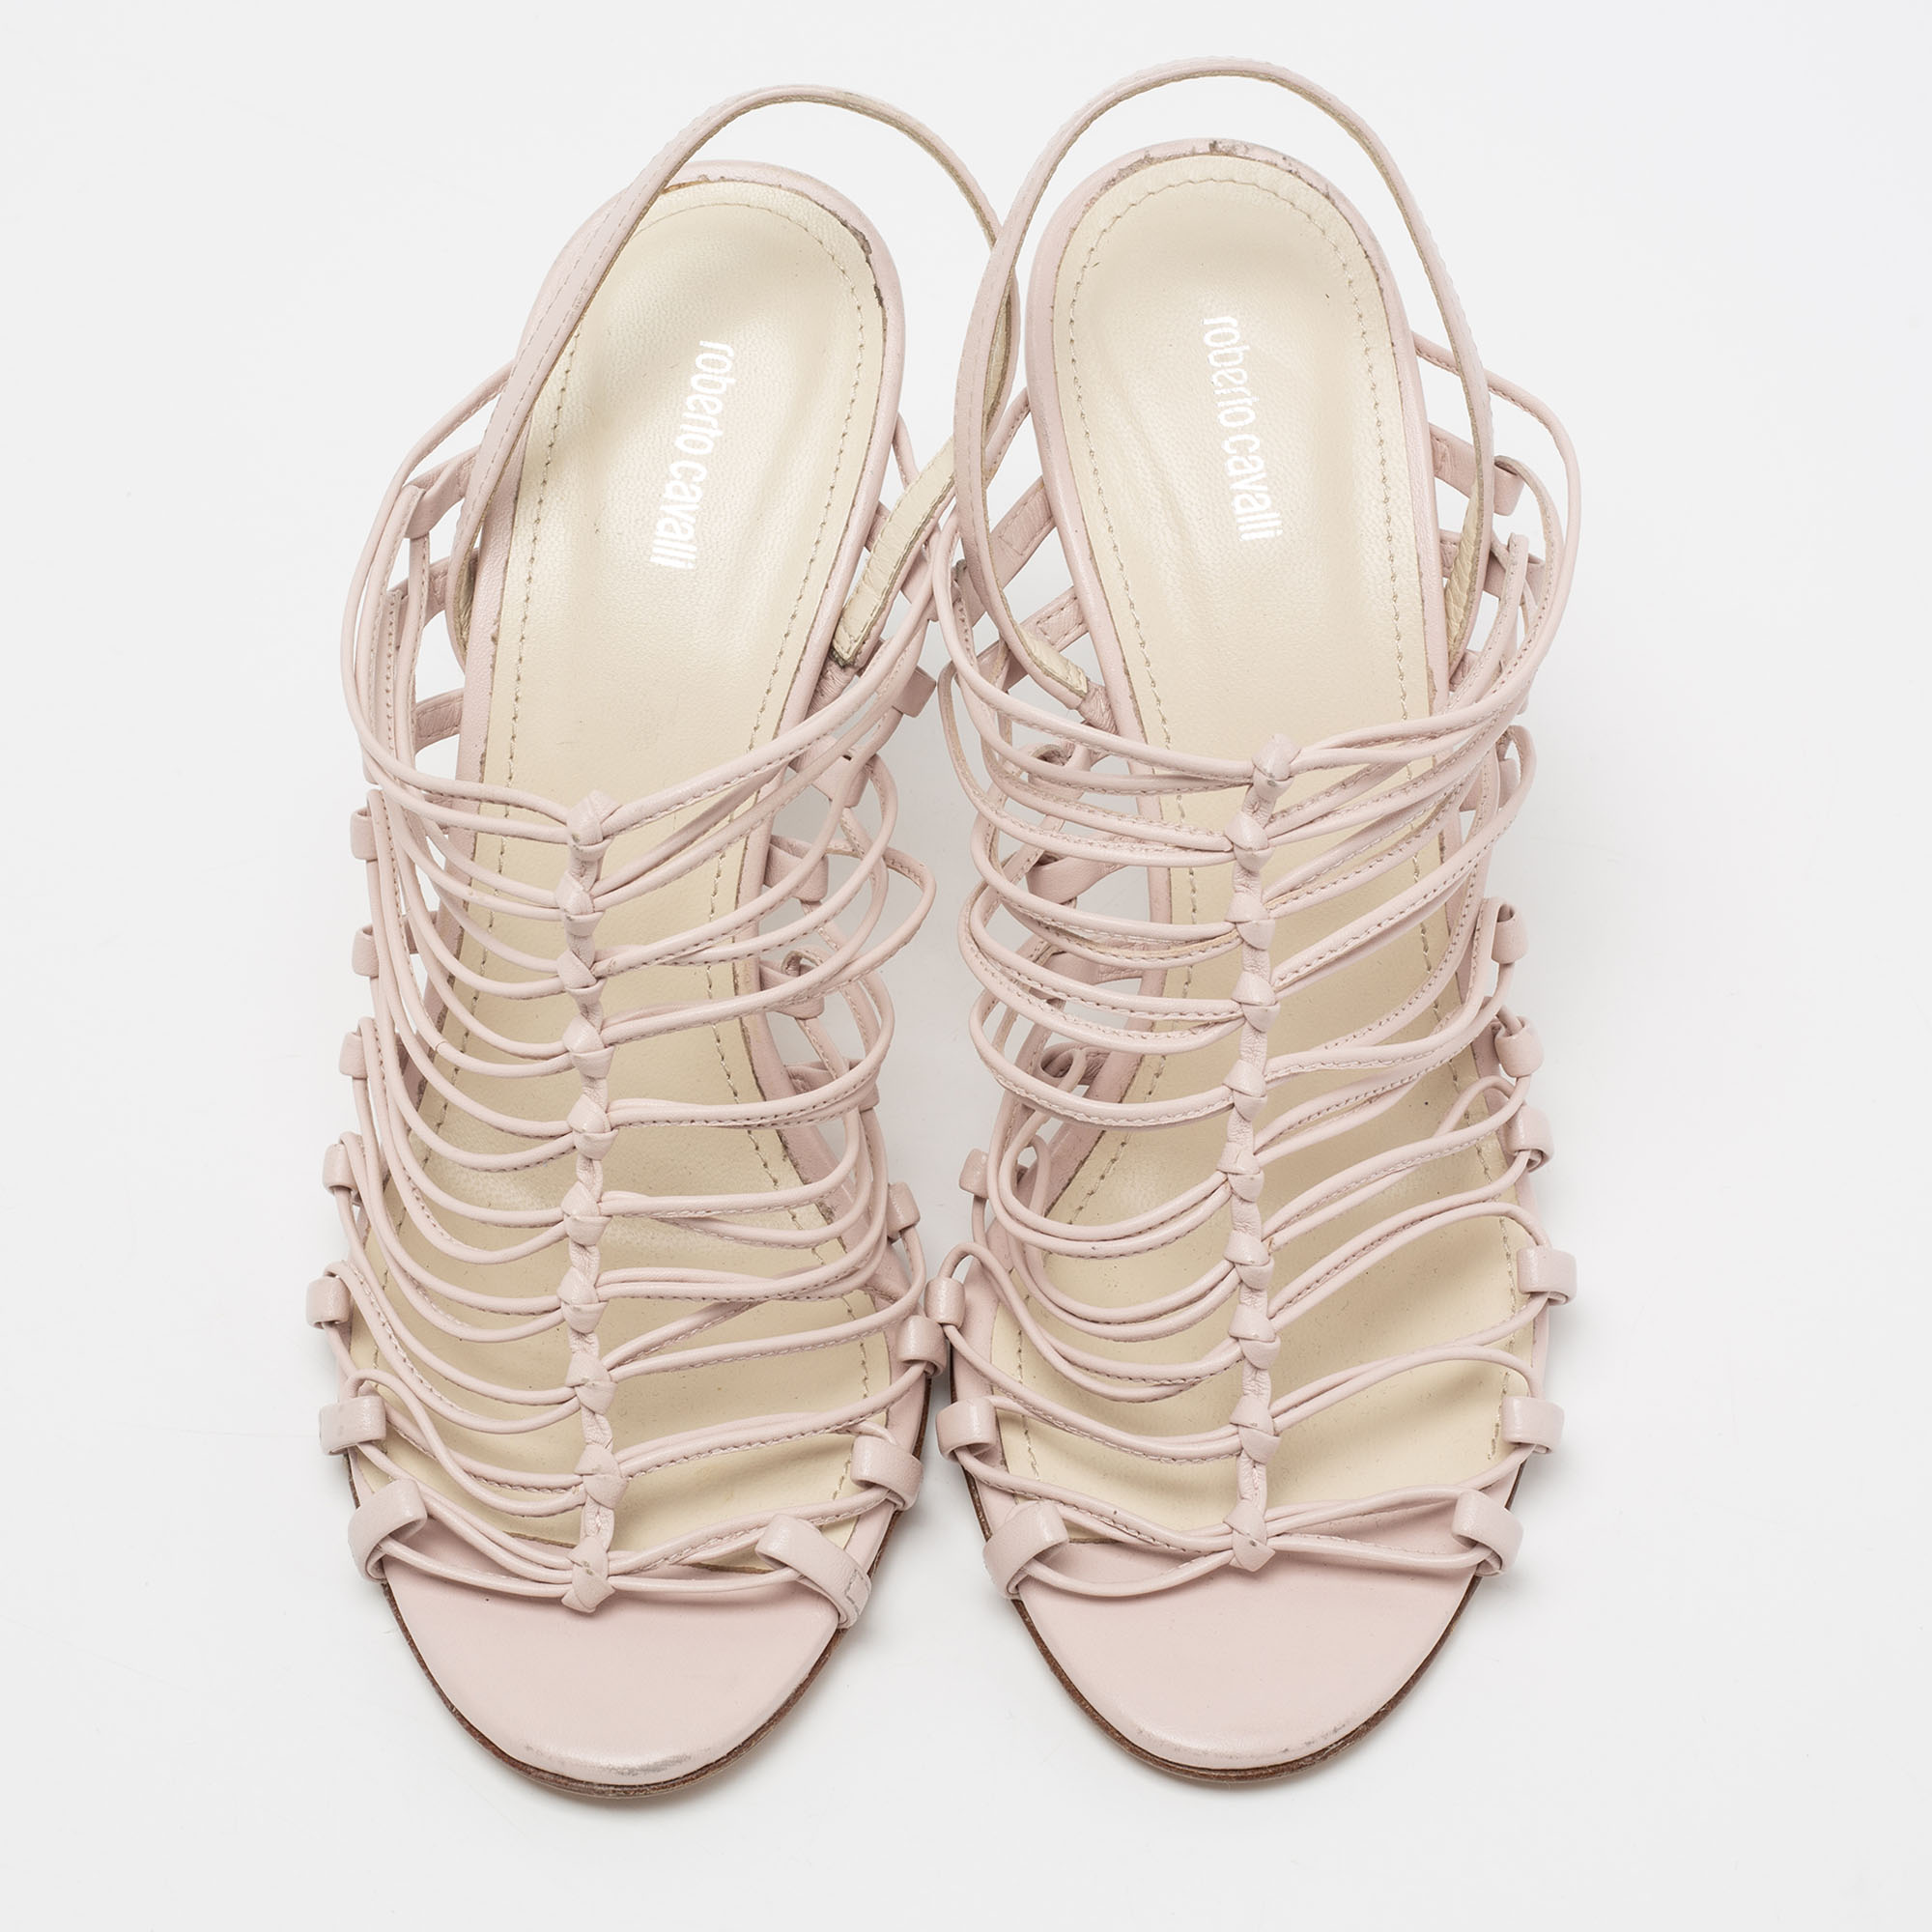 Roberto Cavalli Pale Pink Leather Knot Detail Strappy Sandals Size 37